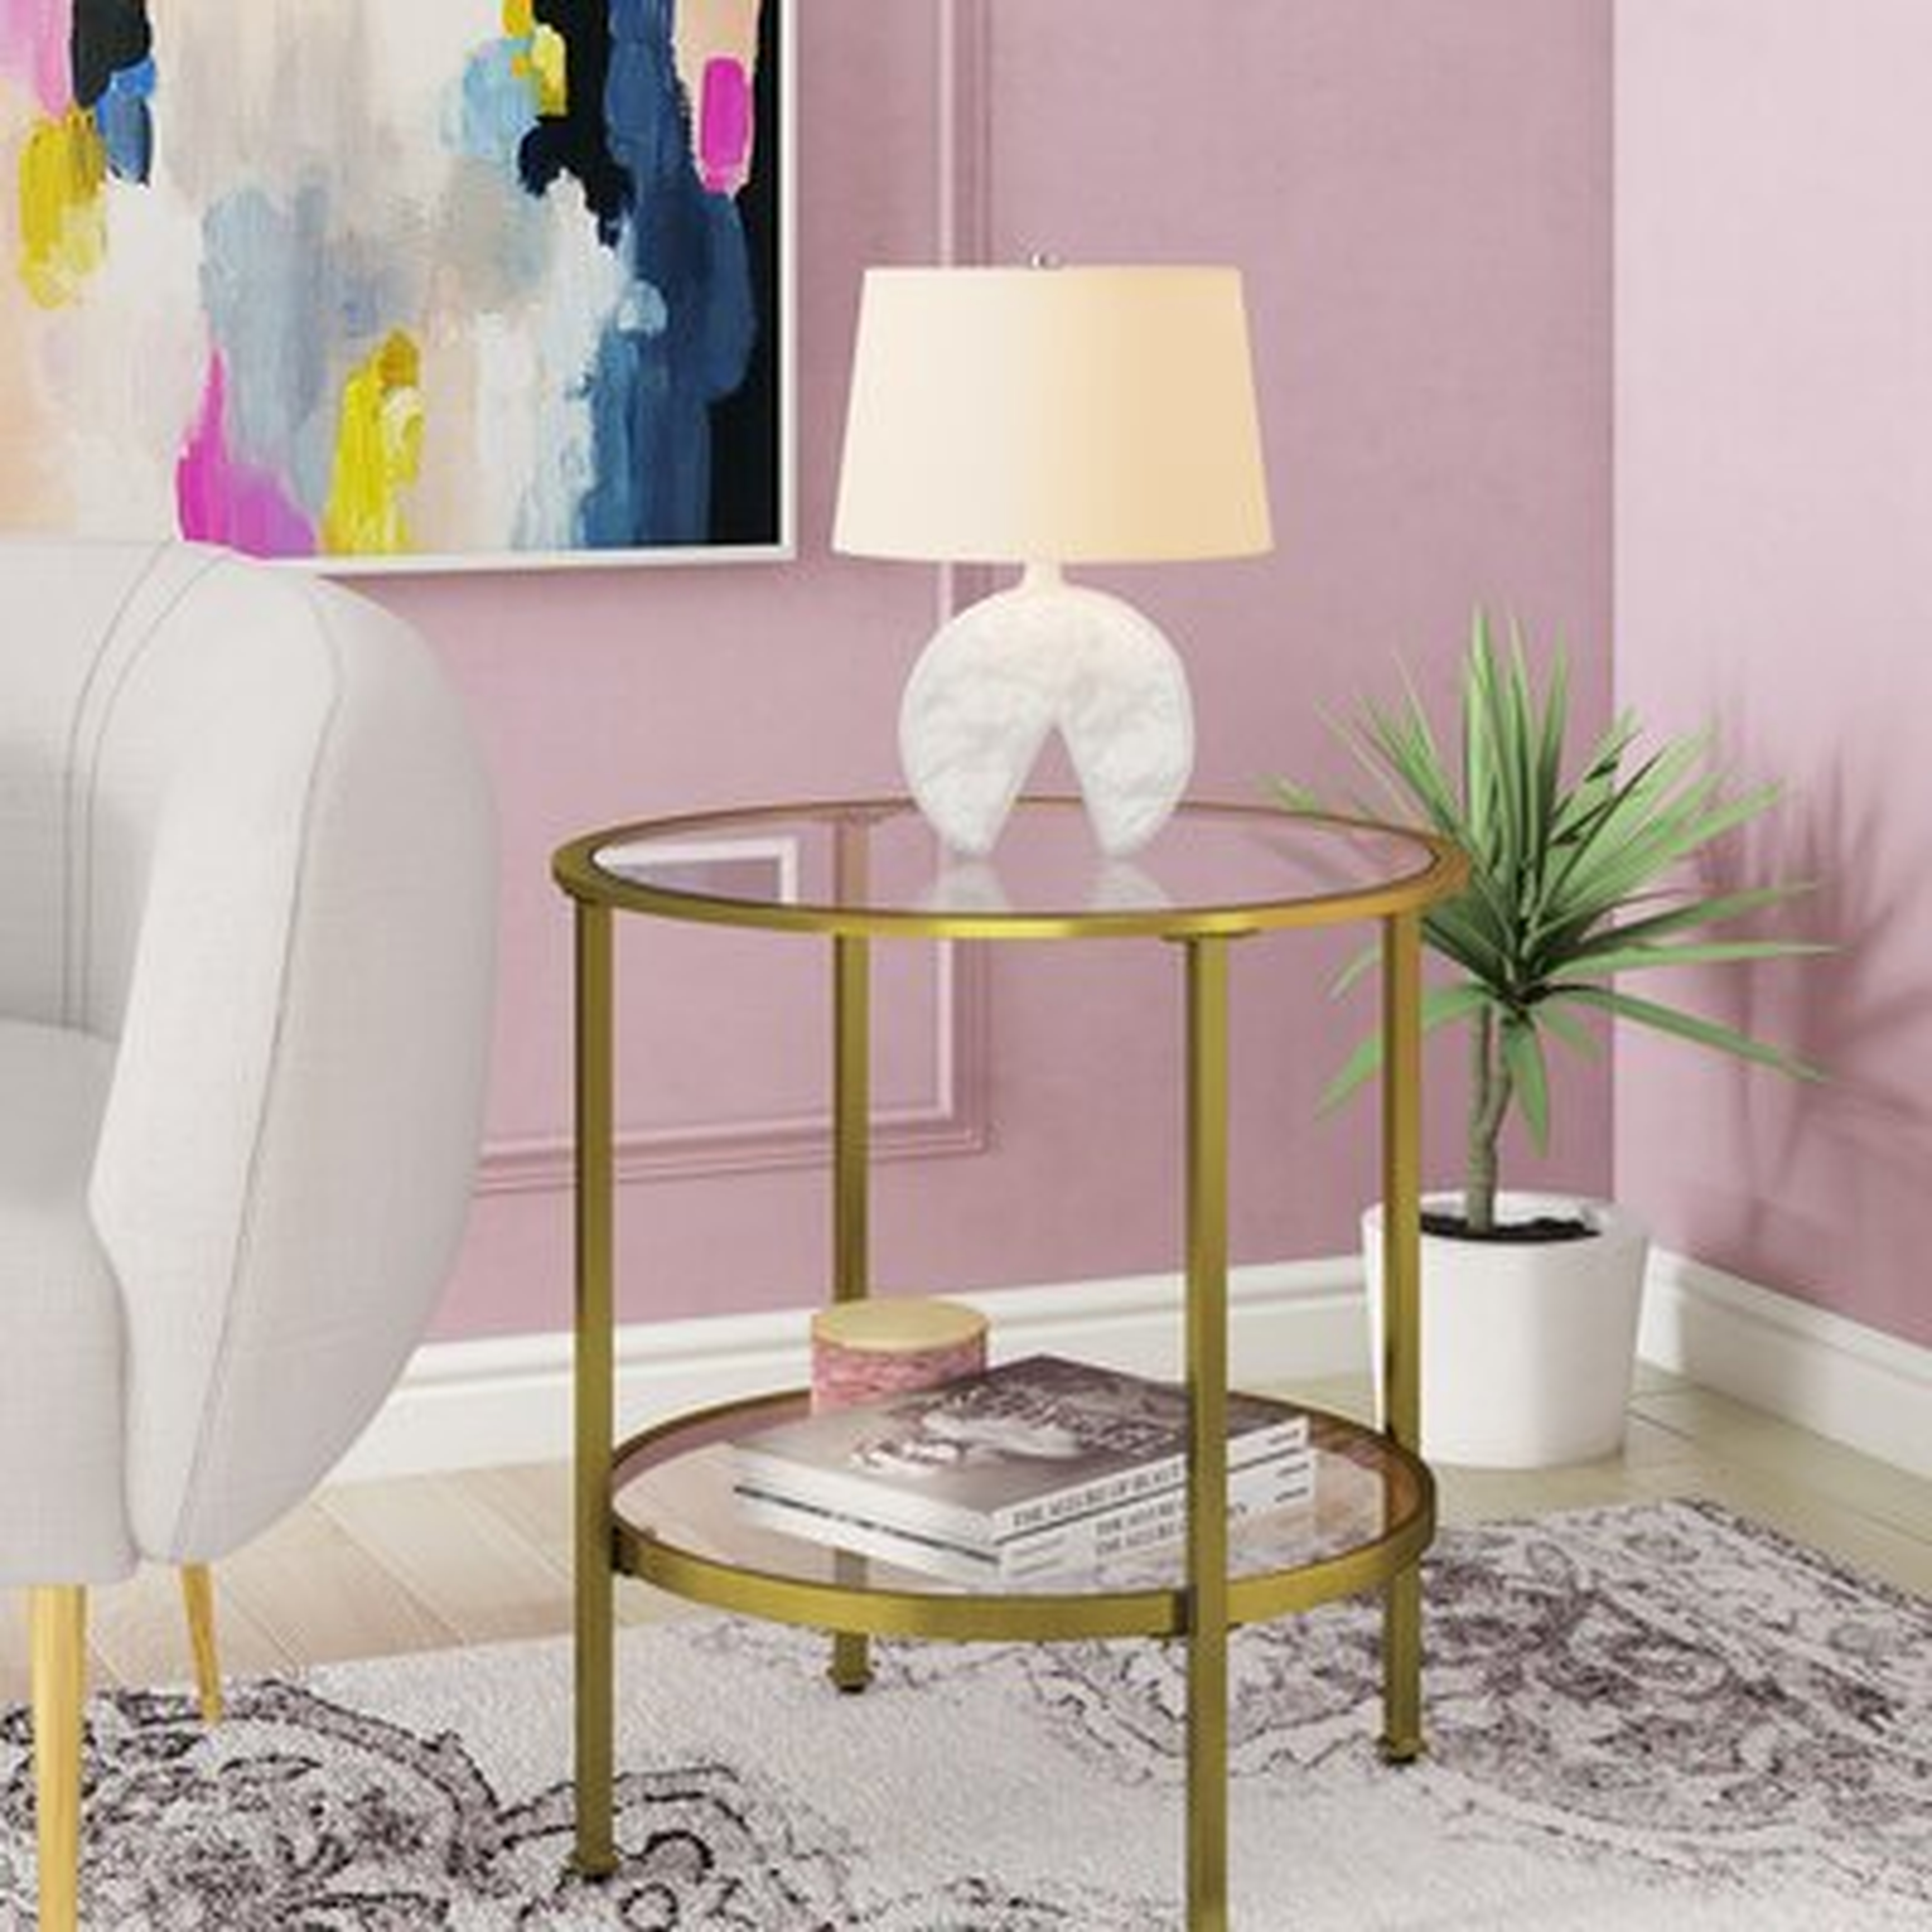 Margarita Glass Top End Table with Storage - Wayfair